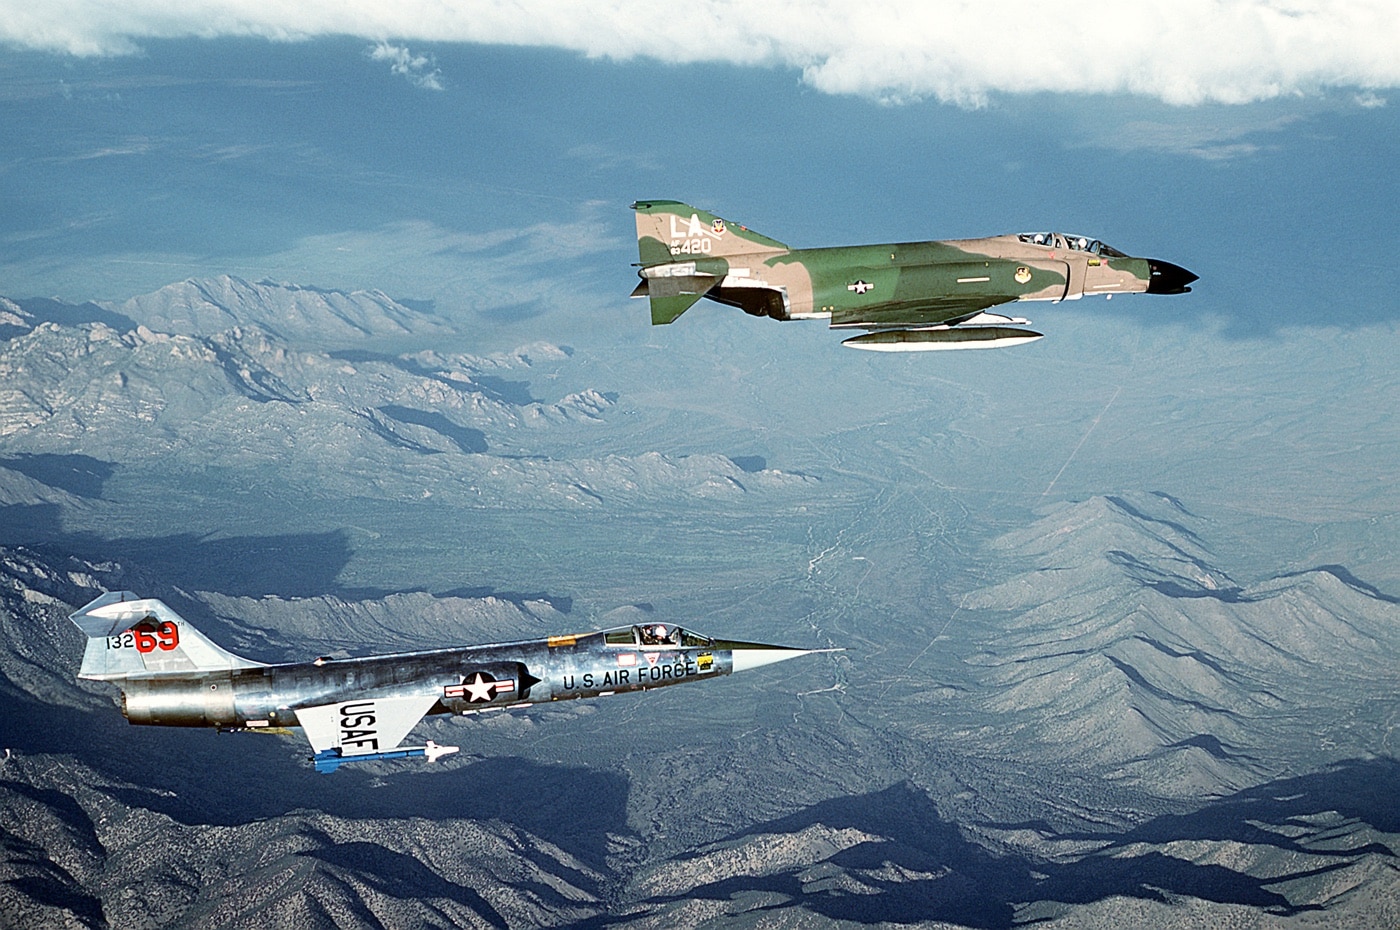 Here we see the classic F-104 in flight along with the more modern McDonnell Douglas F-4 Phantom II. Both air force fighters were well known for their high speed capabilities.